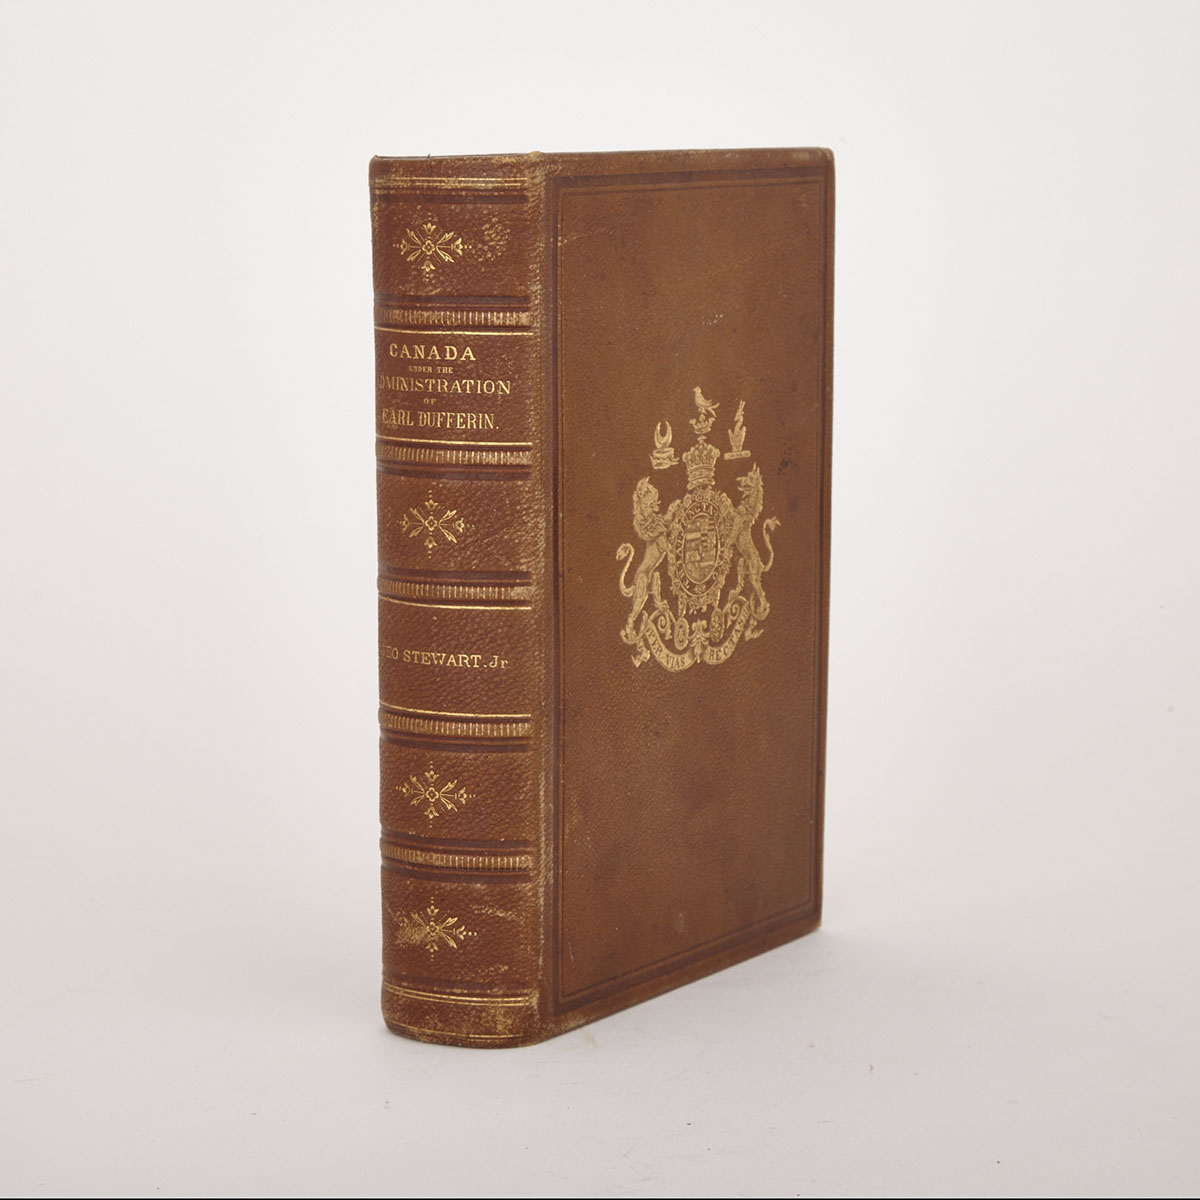 [Book-Canadian History] Canada Under the Administration of The Earl of Dufferin, 1878